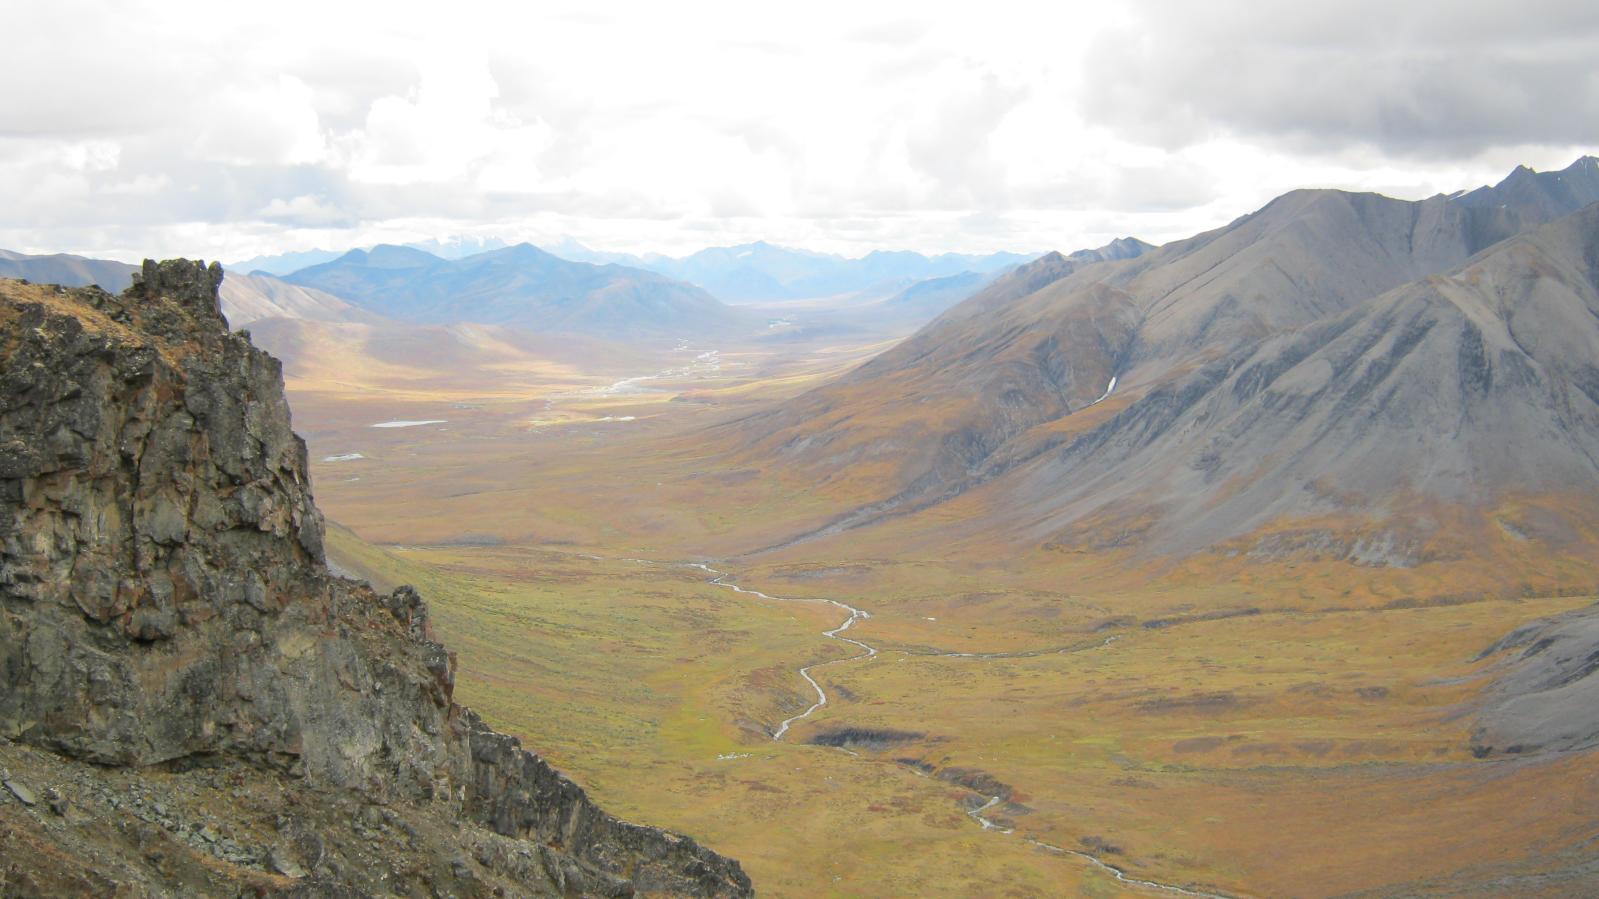 Foreground cliff and beautiful valley vista in the Yukon Territory